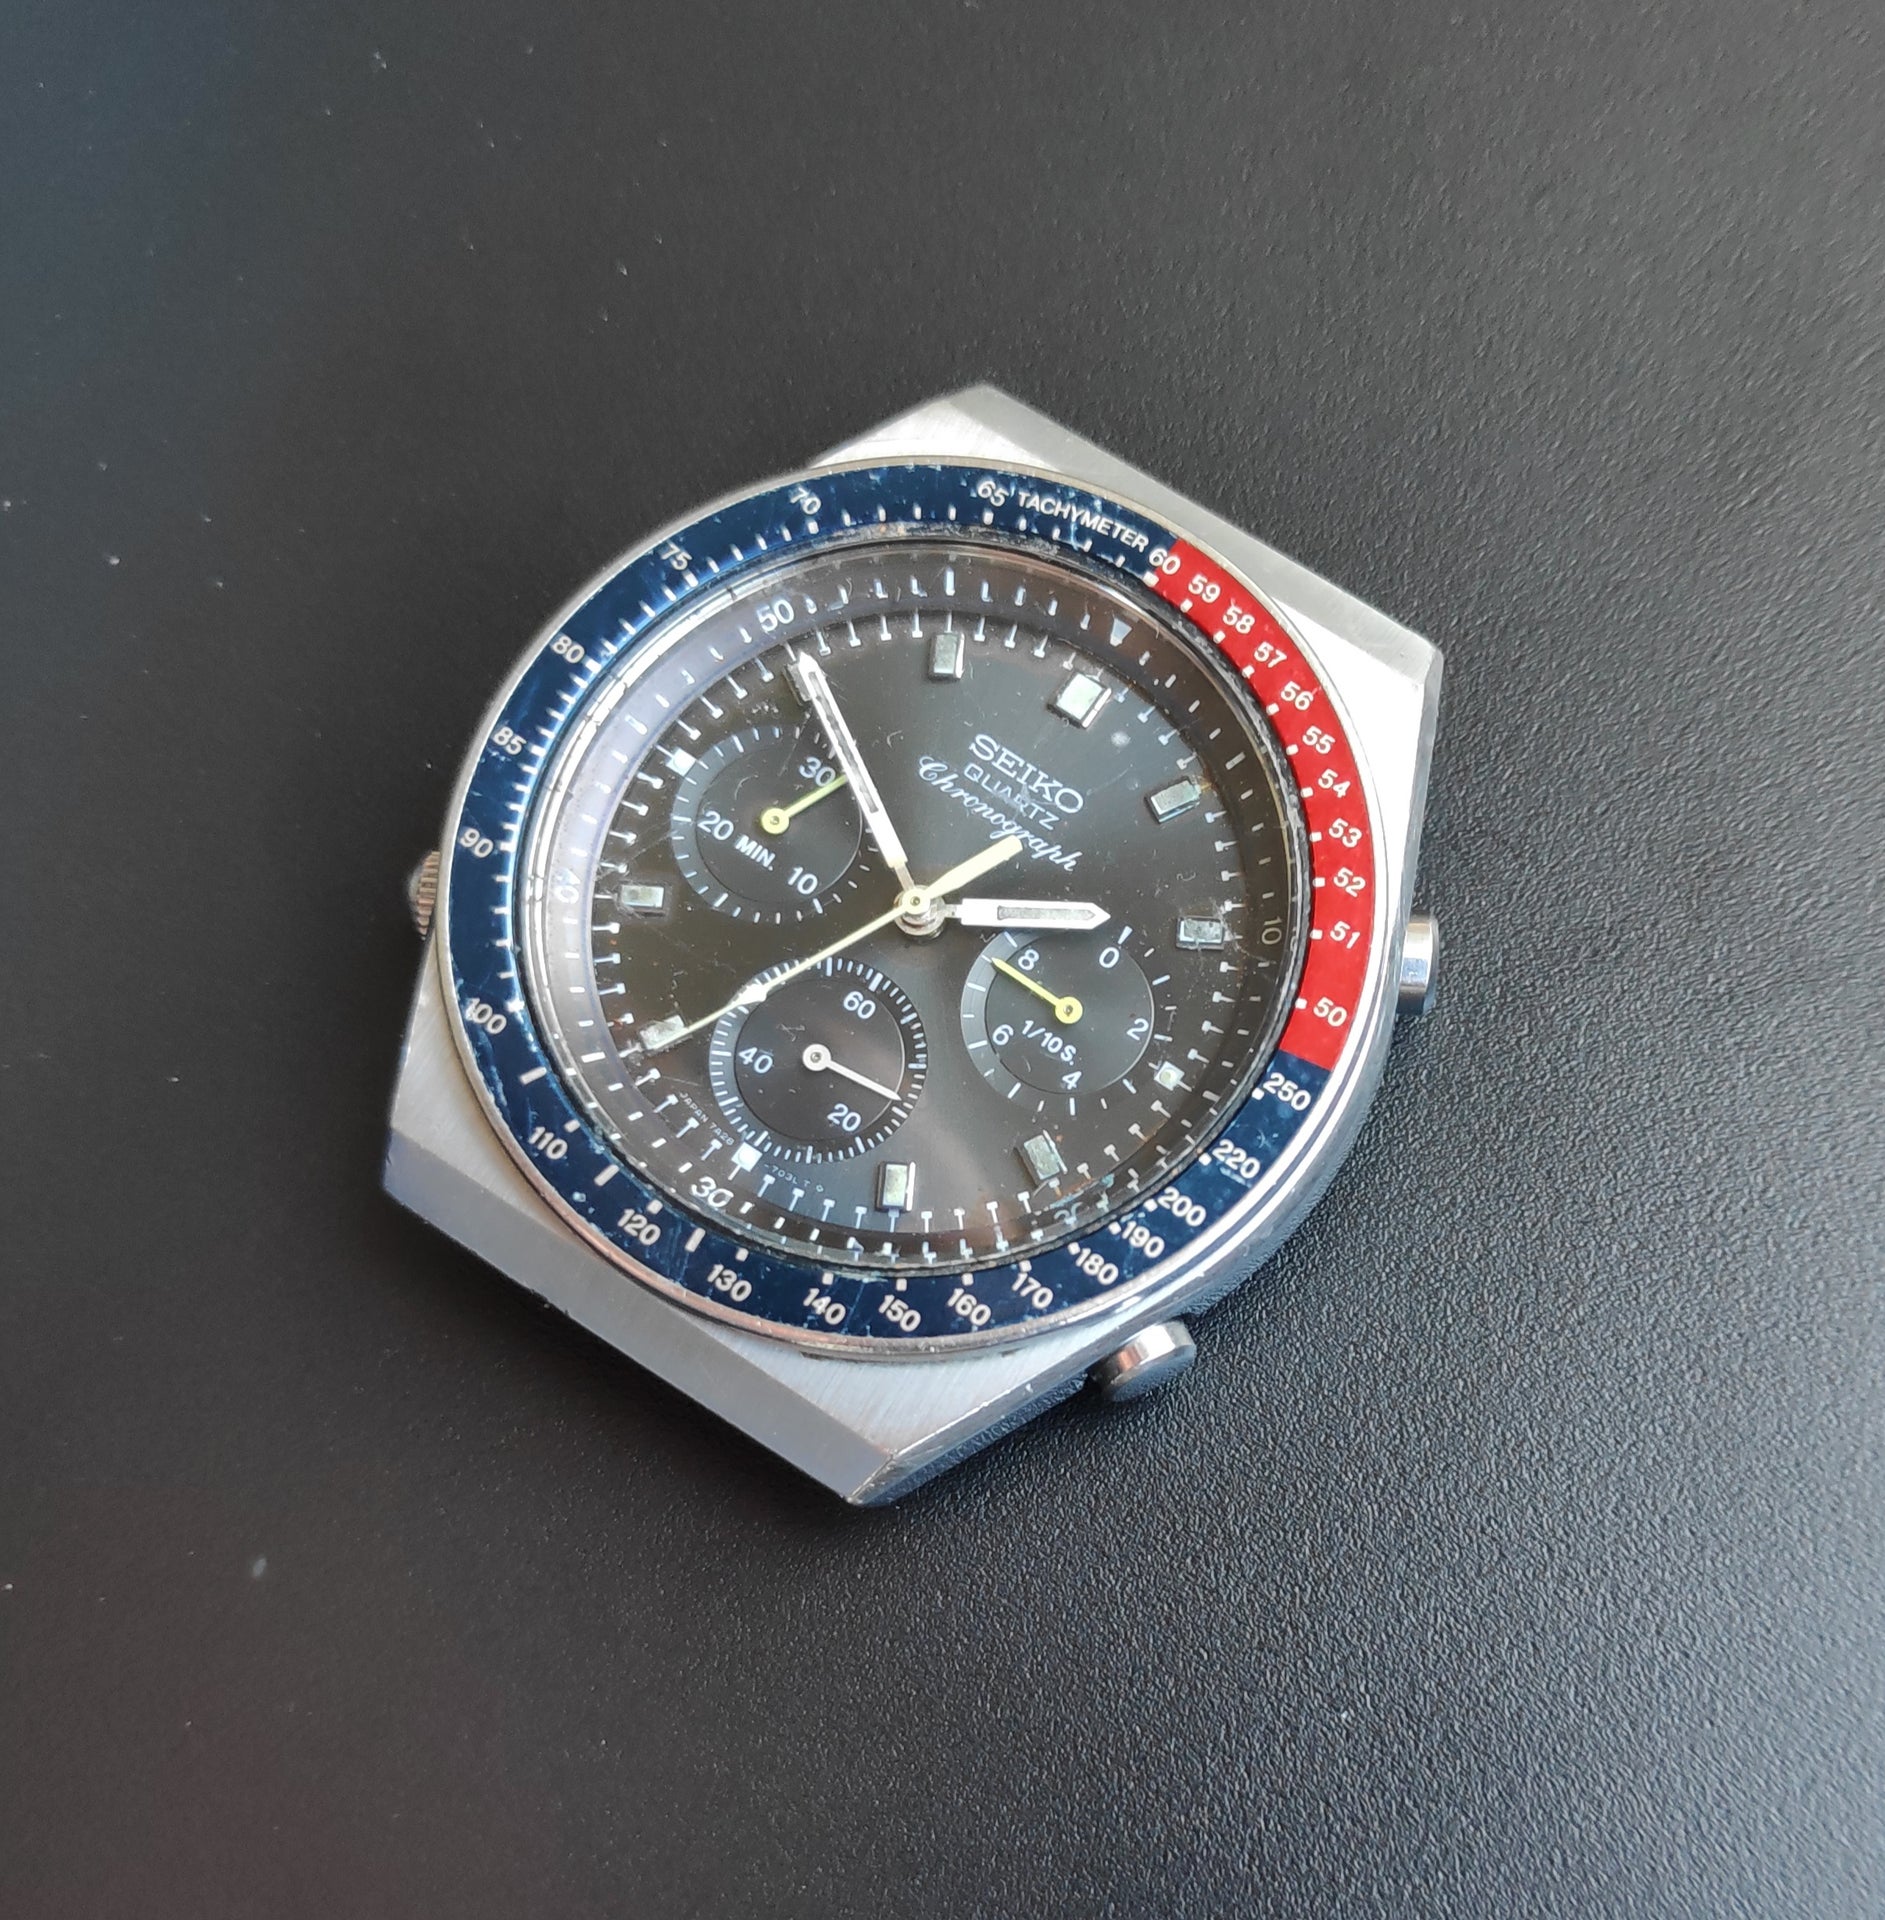 SOLD: Seiko 7a28-703a project €160 | The Watch Site